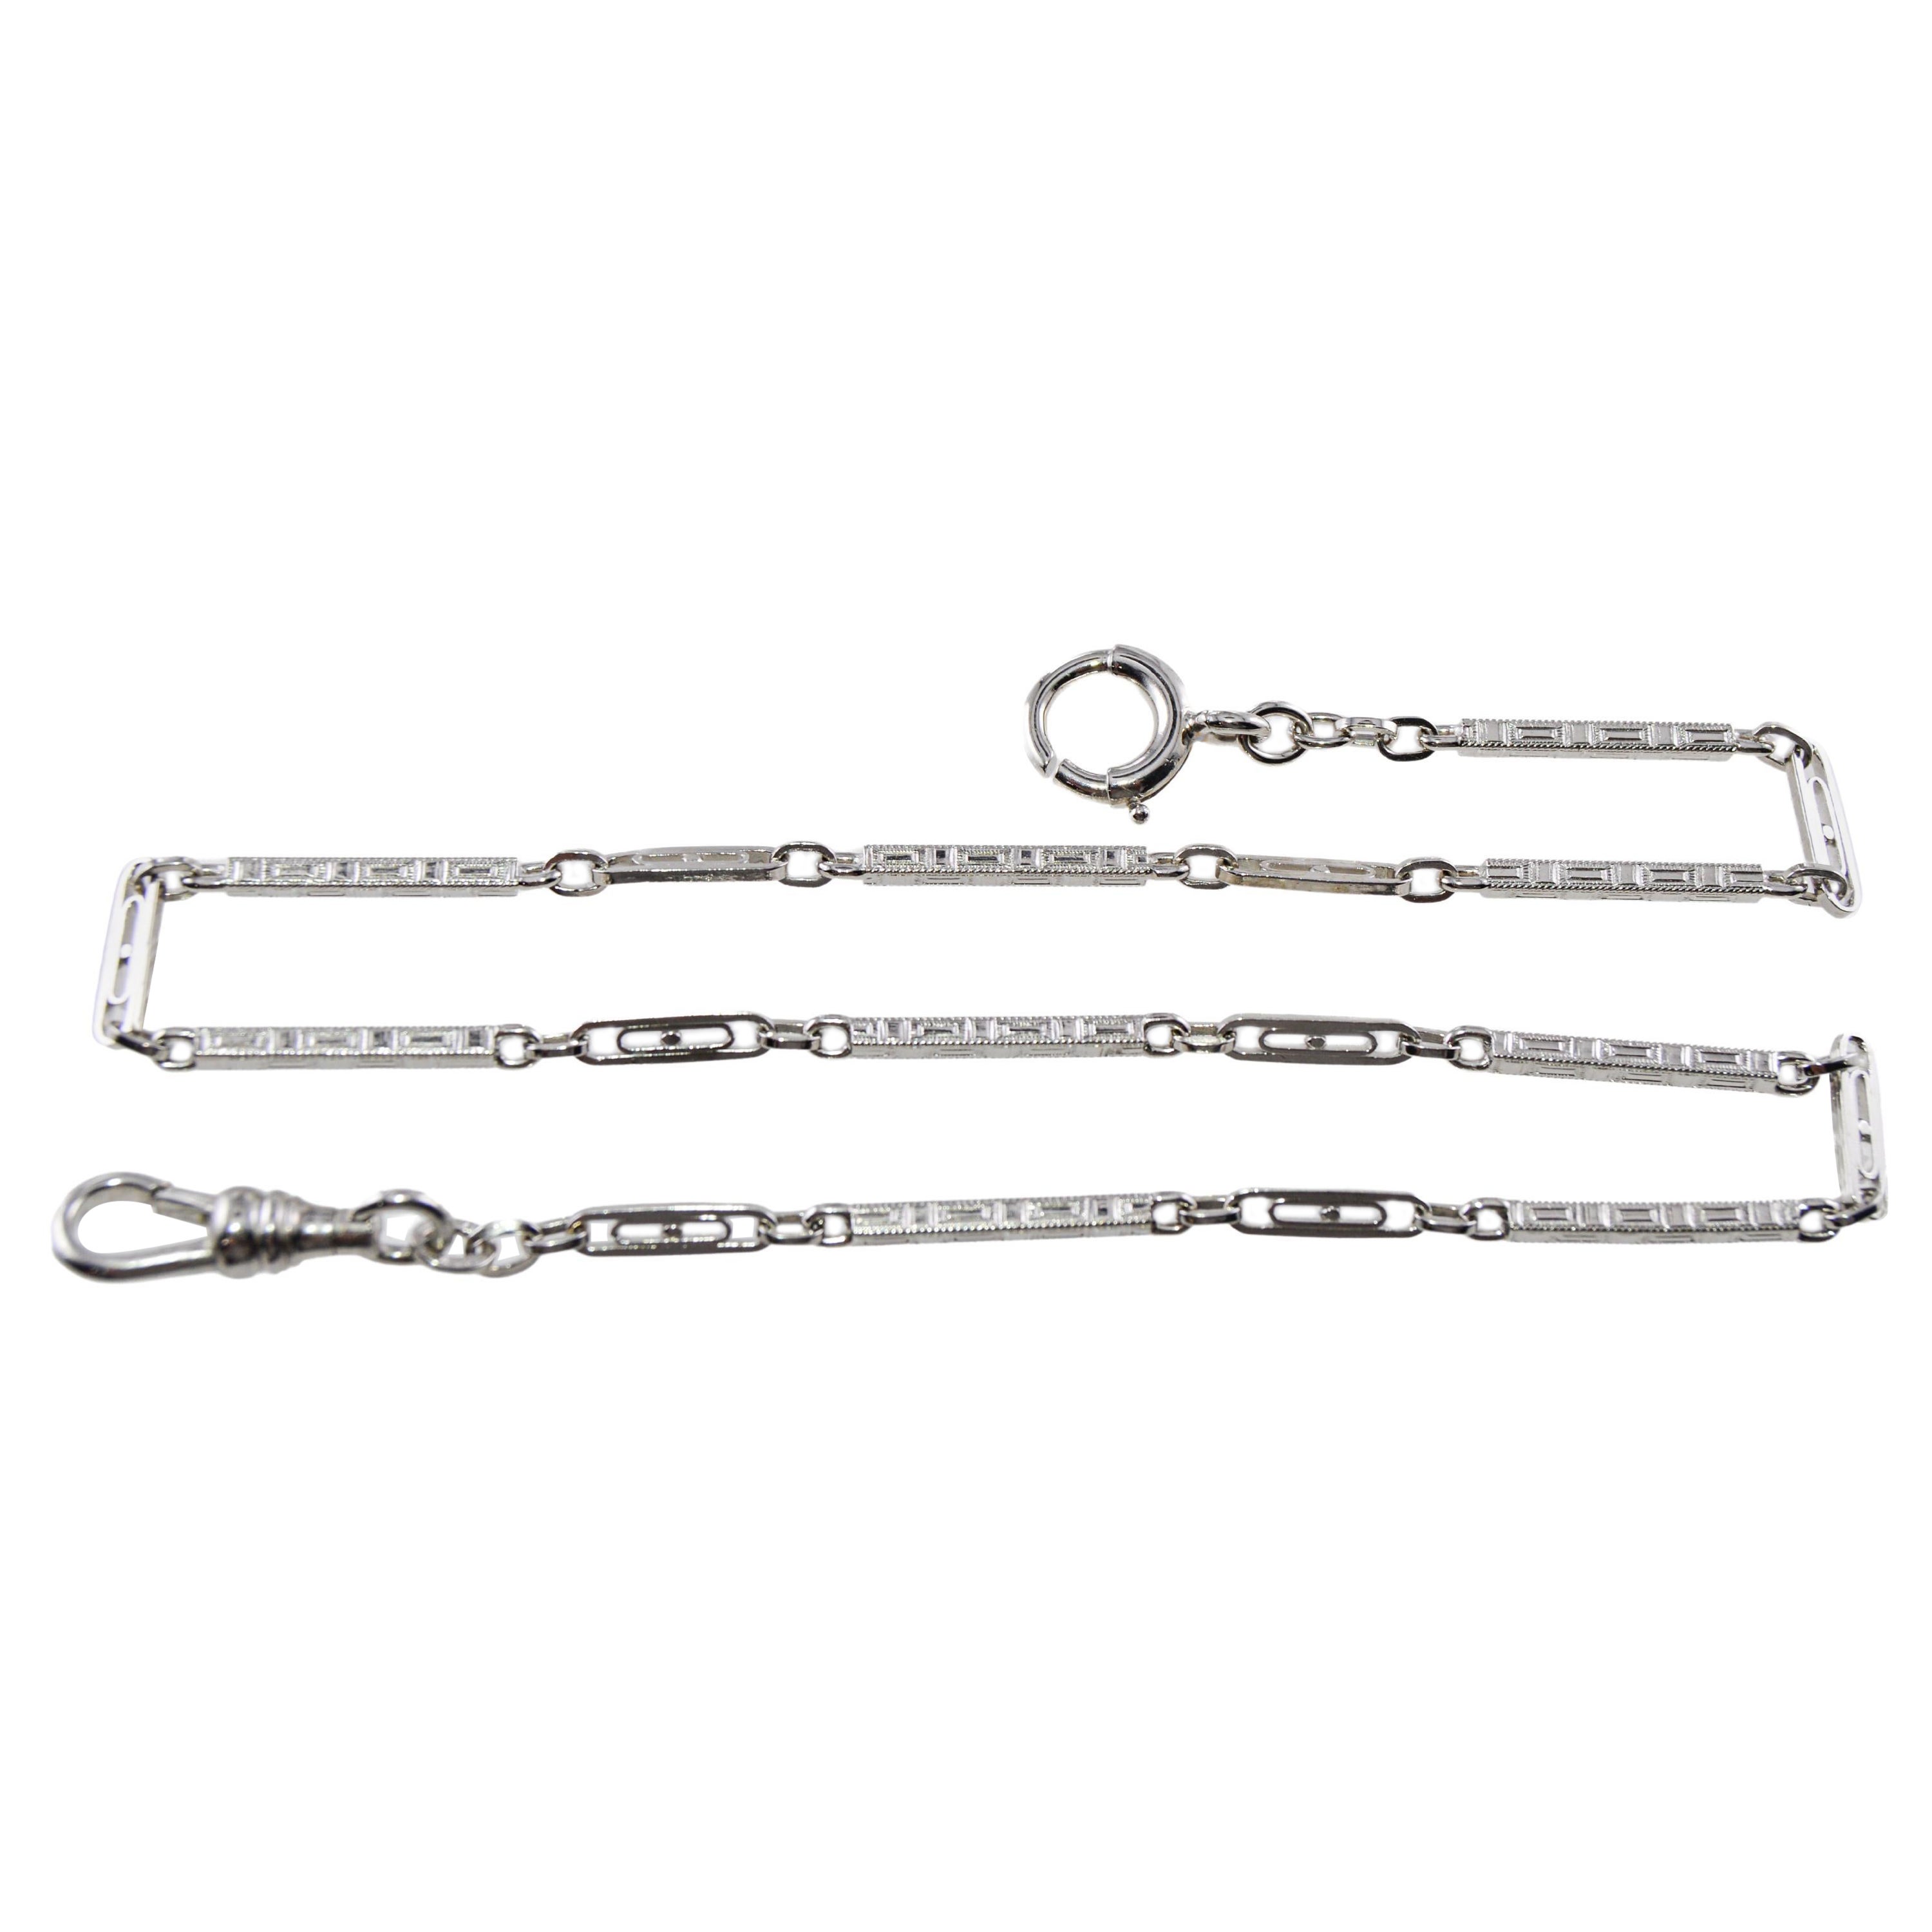 14Kt White Gold Necklace, Bracelet or Pocket Watch Chain circa 1920's / 30's